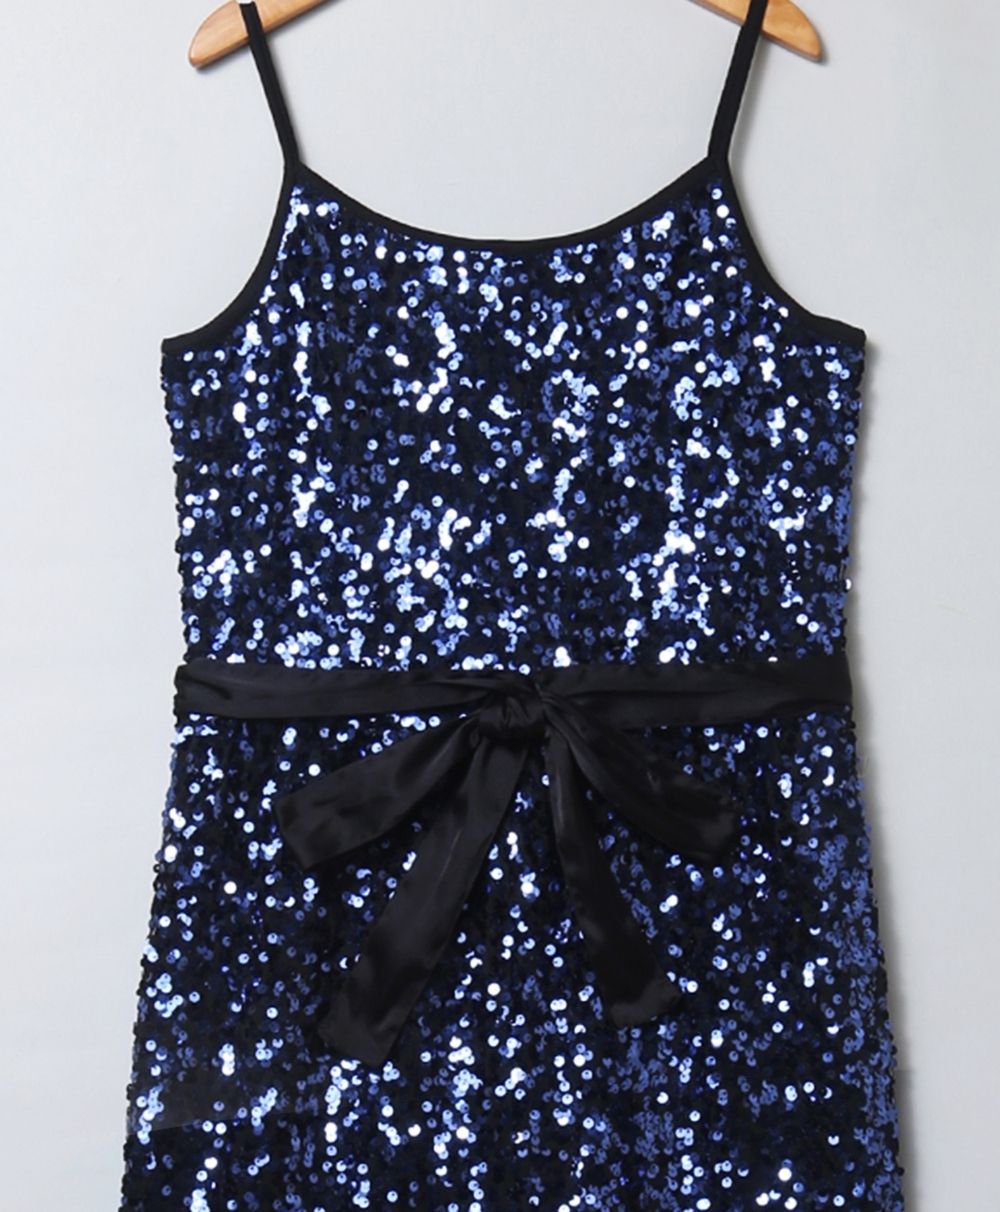 Blue Sparkly Shimmering Sequence Jumpsuit